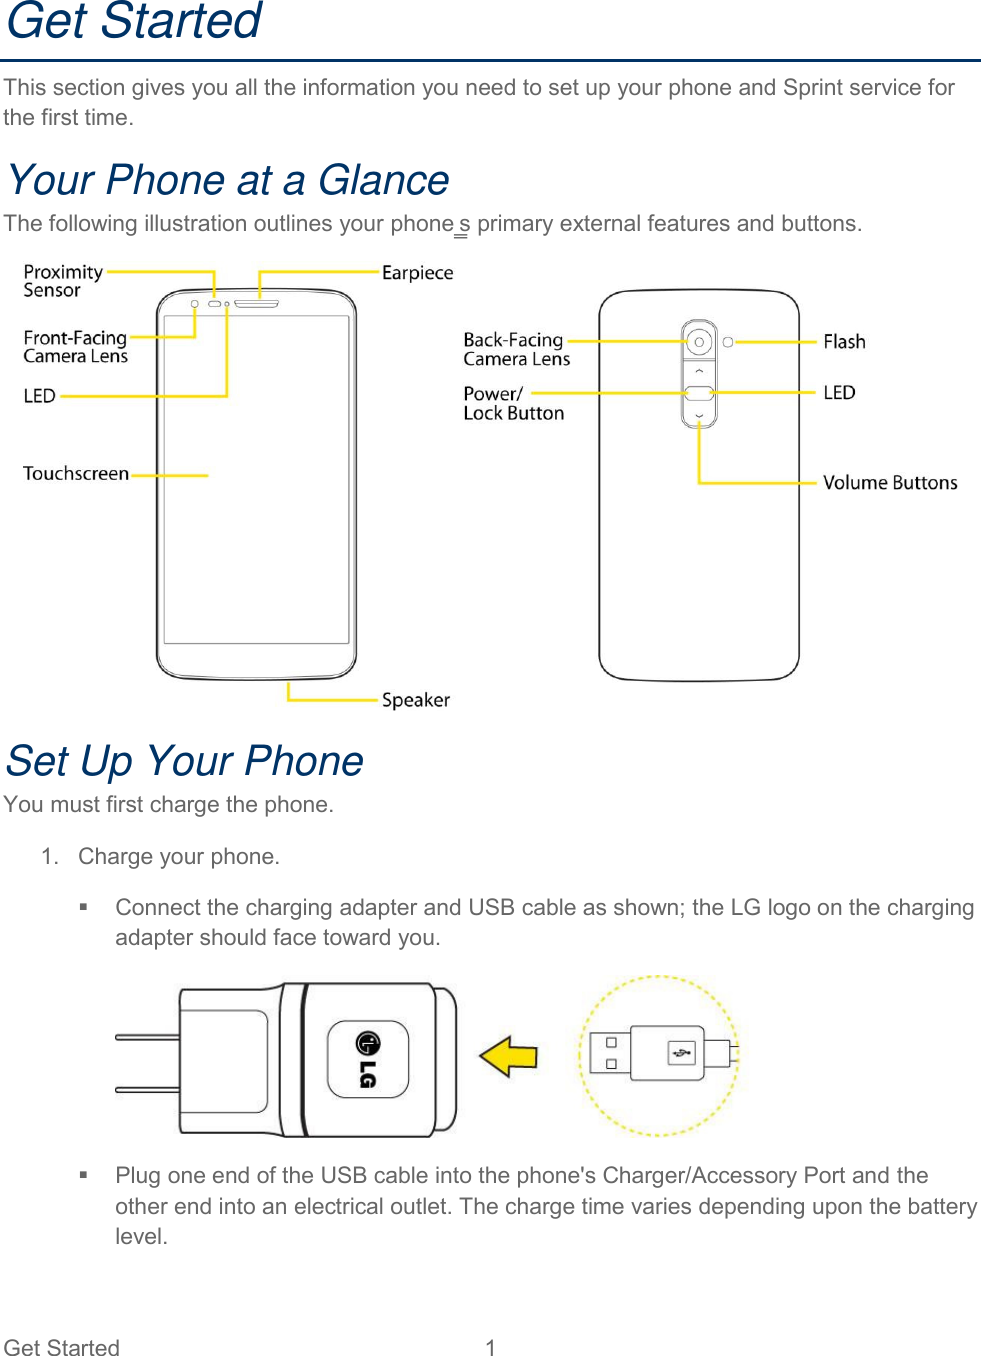  Get Started  1   Get Started This section gives you all the information you need to set up your phone and Sprint service for the first time. Your Phone at a Glance The following illustration outlines your phone‗s primary external features and buttons.  Set Up Your Phone You must first charge the phone. 1.  Charge your phone.   Connect the charging adapter and USB cable as shown; the LG logo on the charging adapter should face toward you.     Plug one end of the USB cable into the phone&apos;s Charger/Accessory Port and the other end into an electrical outlet. The charge time varies depending upon the battery level.  